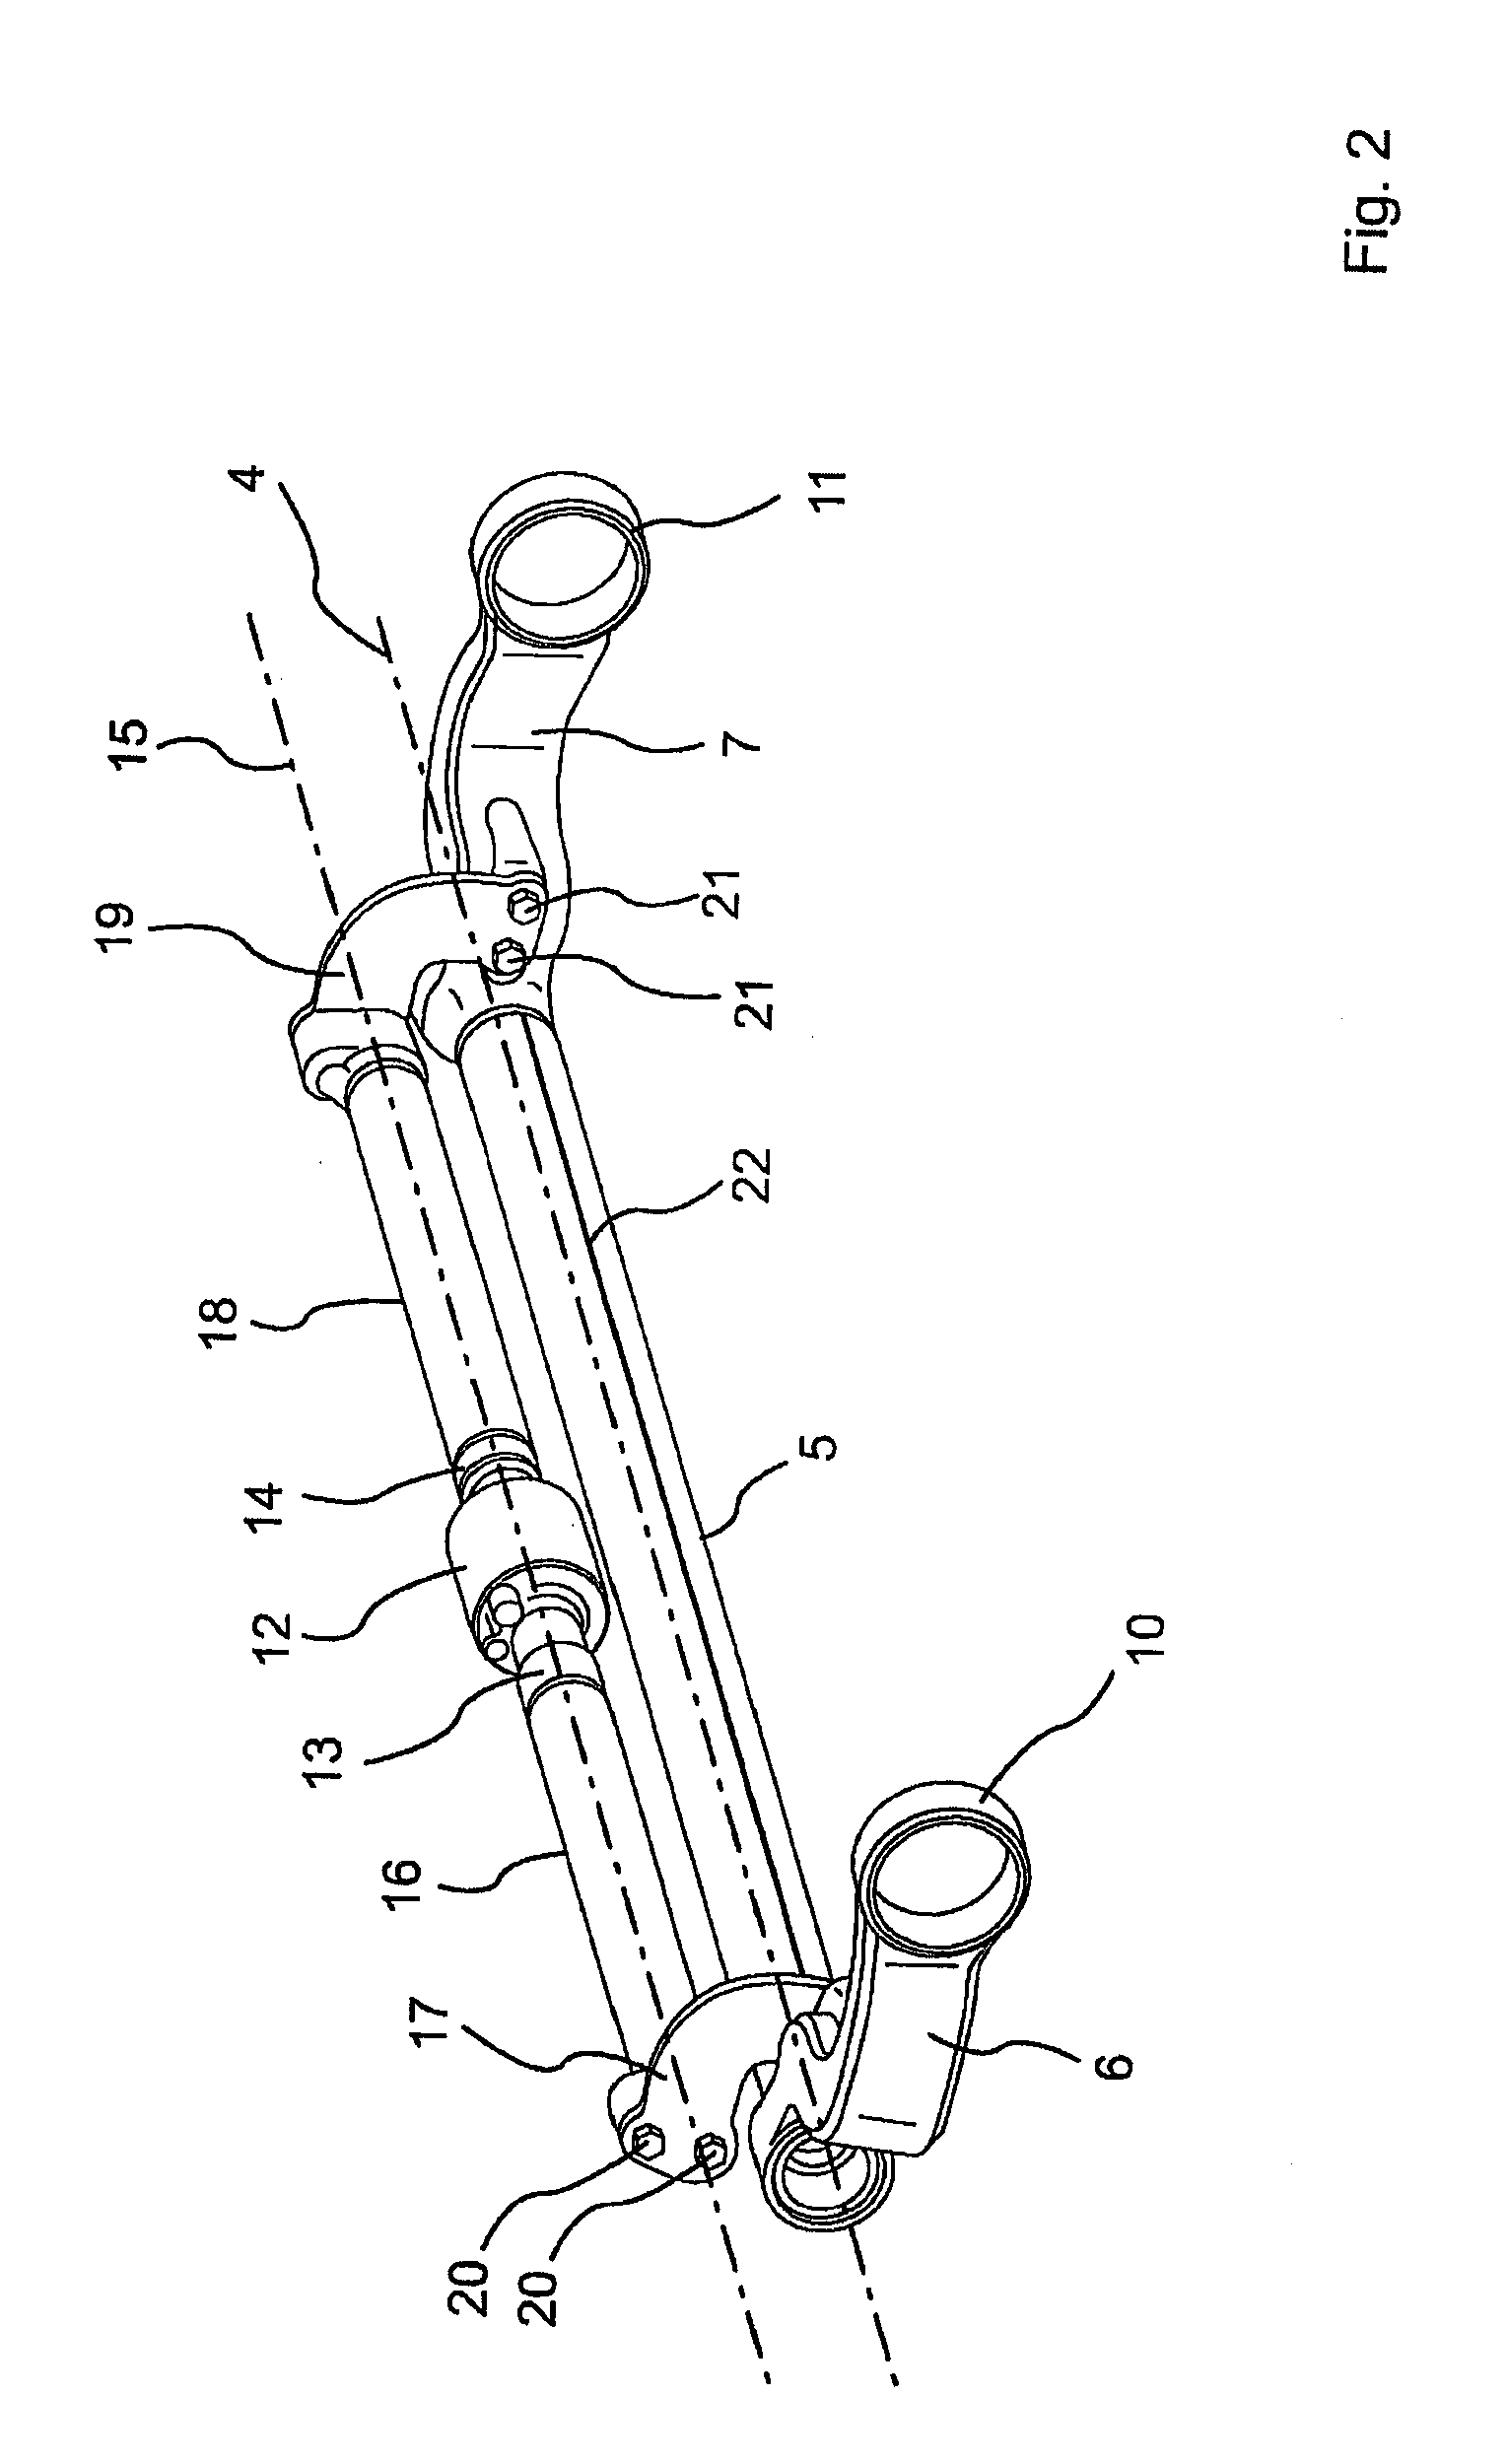 Stabilizer for a utility vehicle